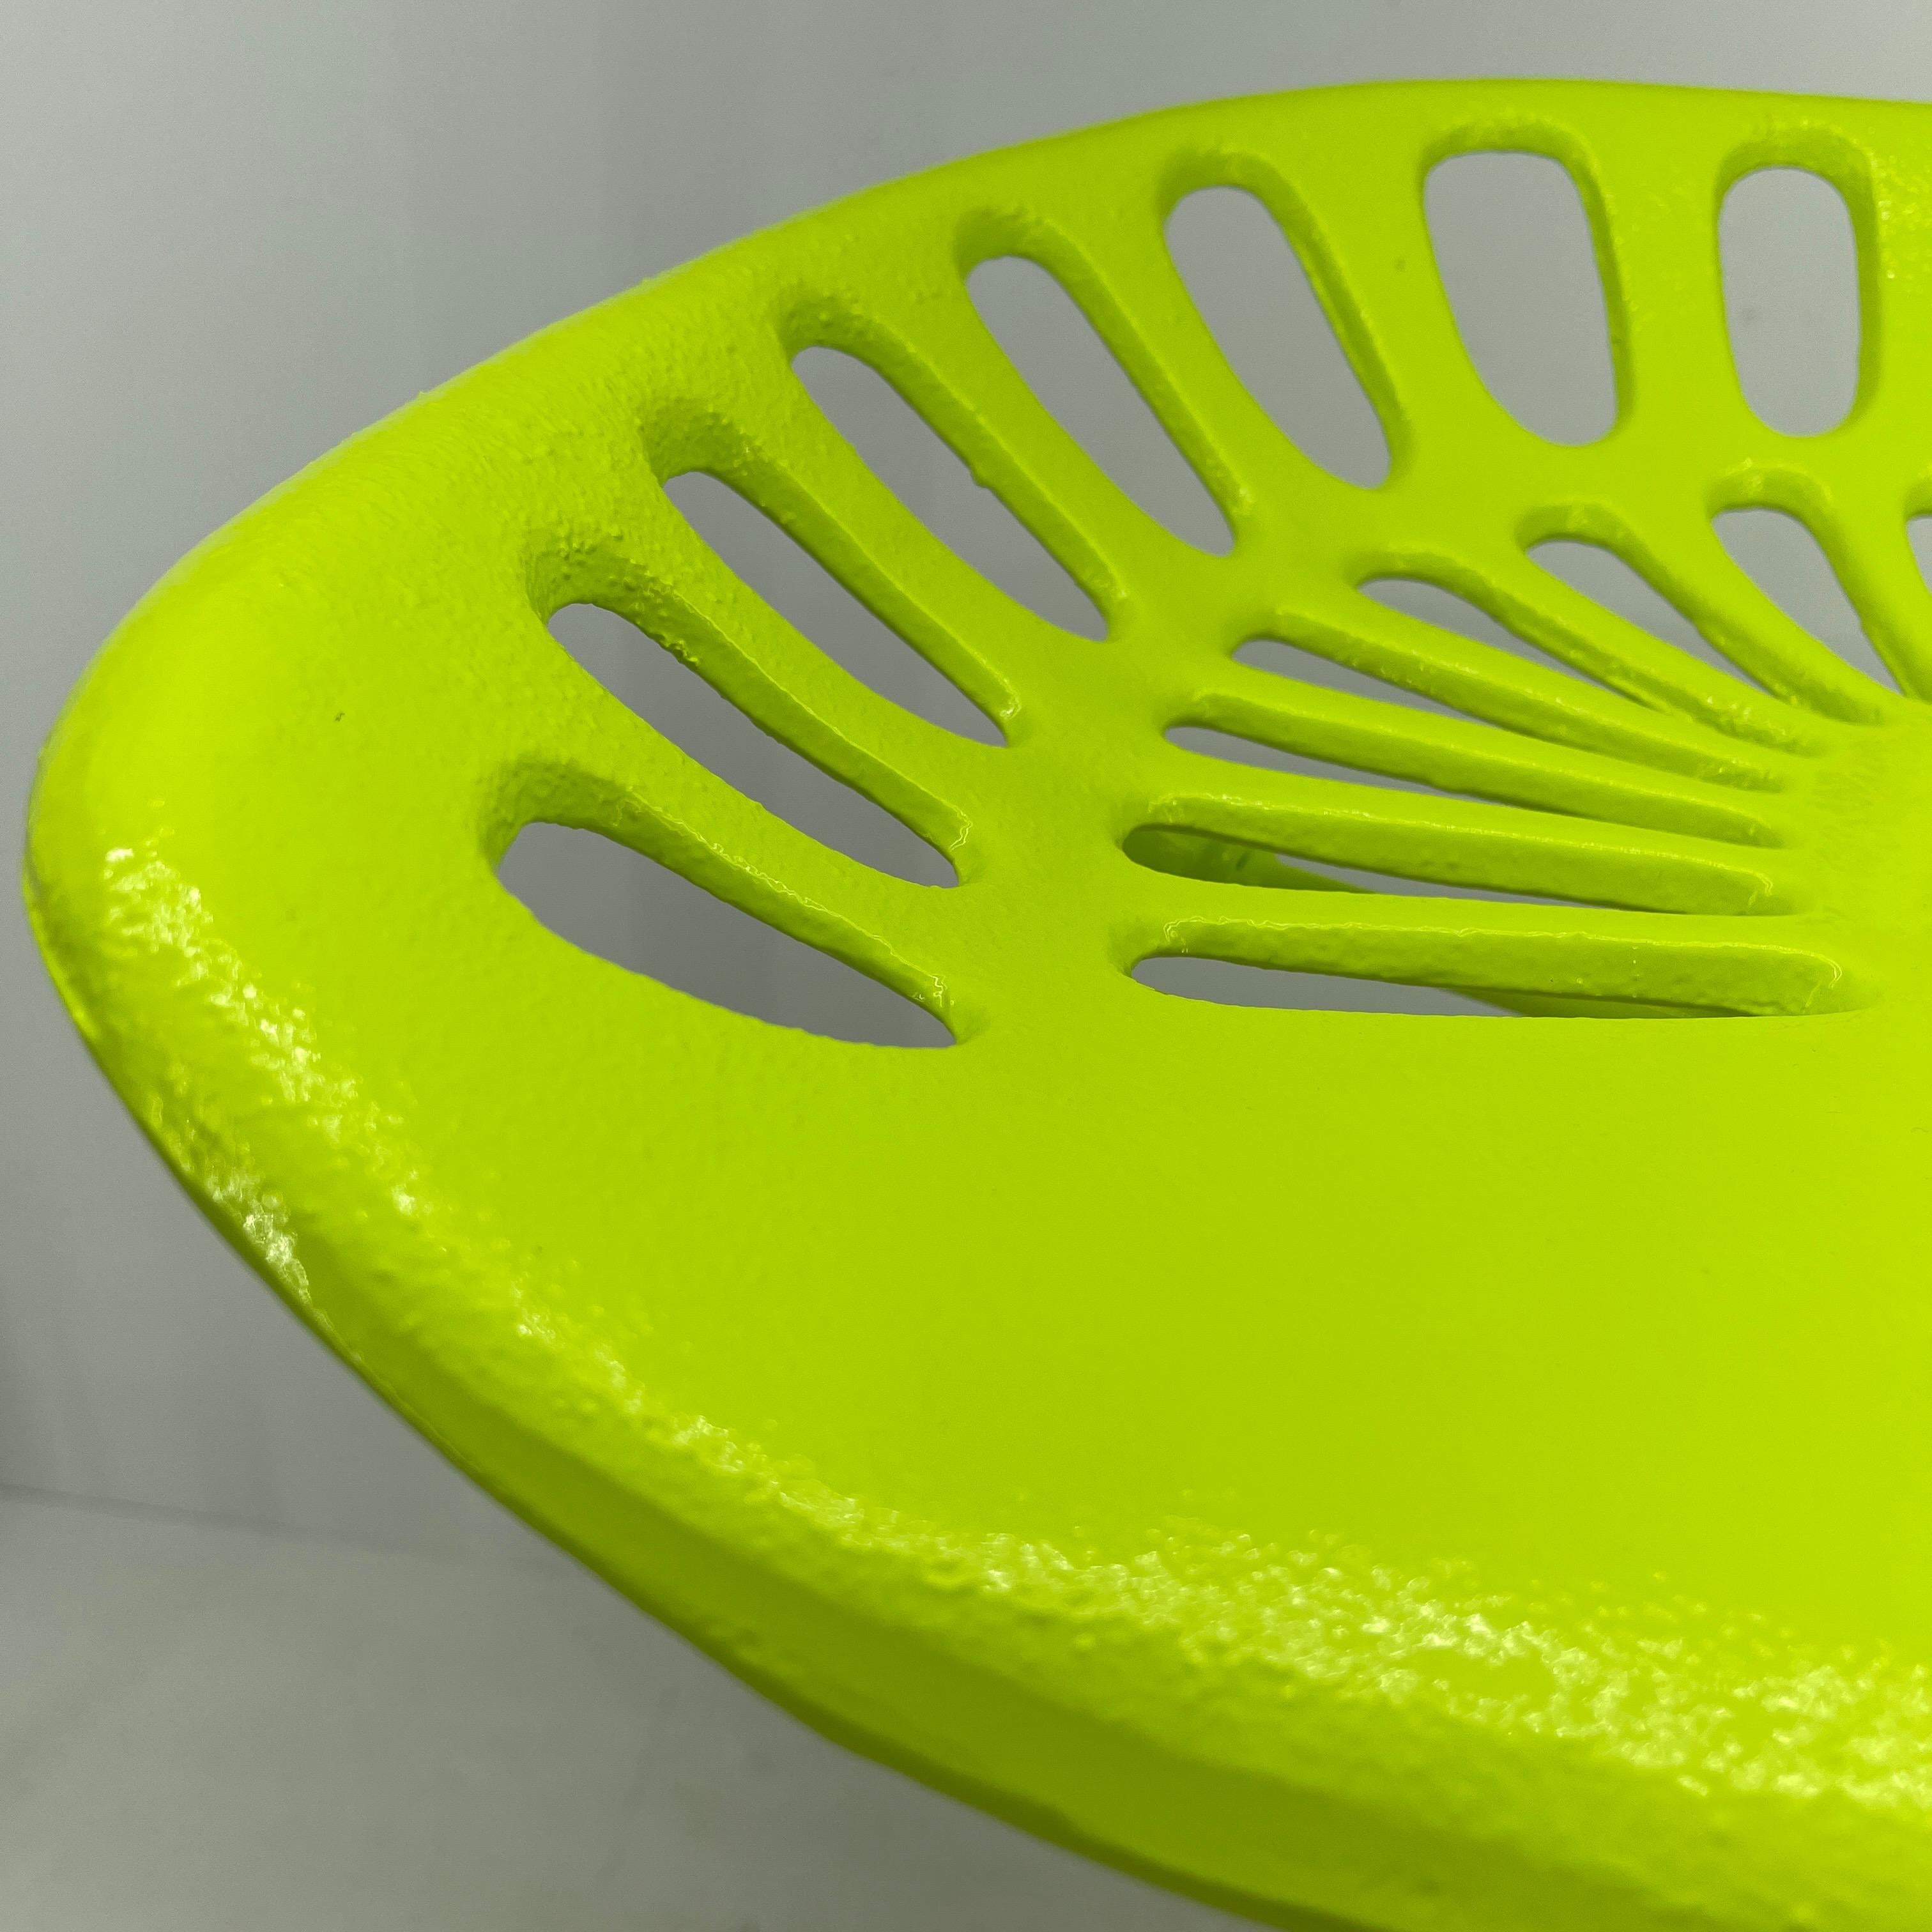 Vintage Industrial Metal Tractor Seat Stool, Powder Coated Chartreuse For Sale 10